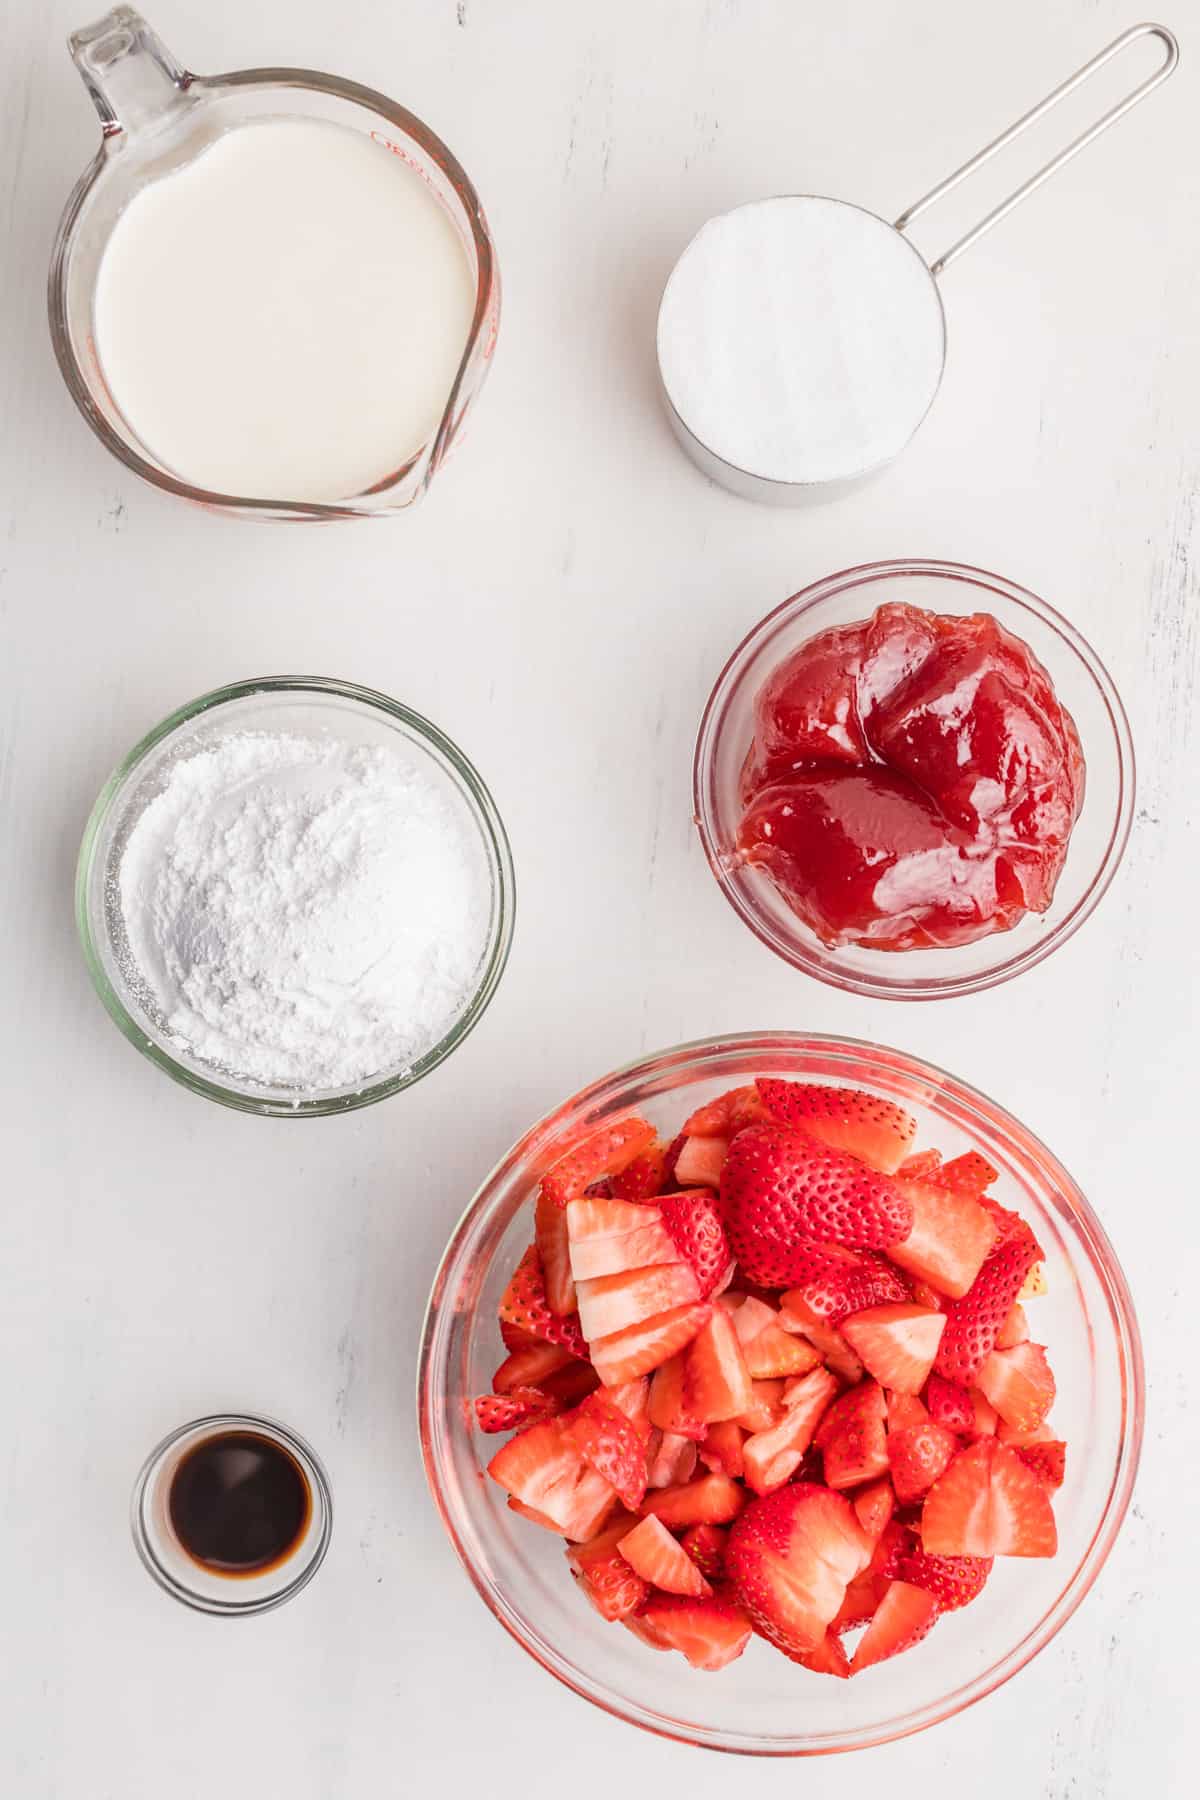 Ingredients needed to make Strawberry Mousse.